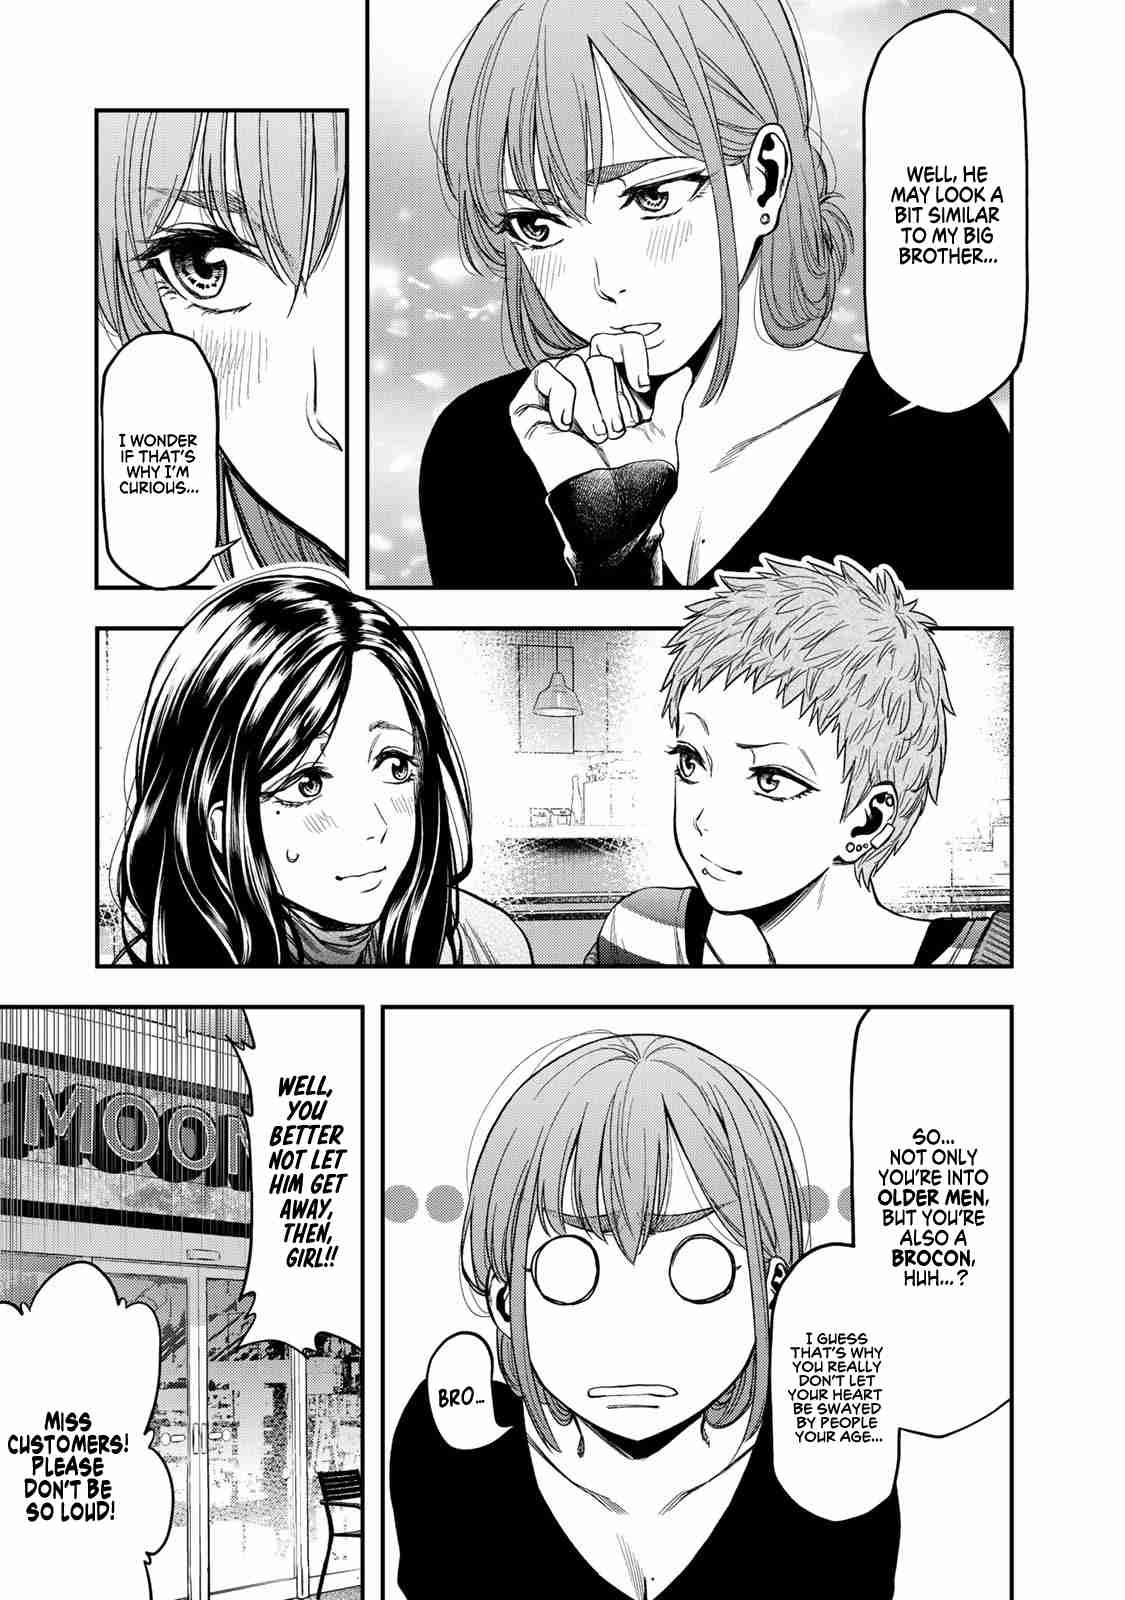 Futari Solo Camp Vol. 1 Ch. 3 I can't take it anymore, geez!